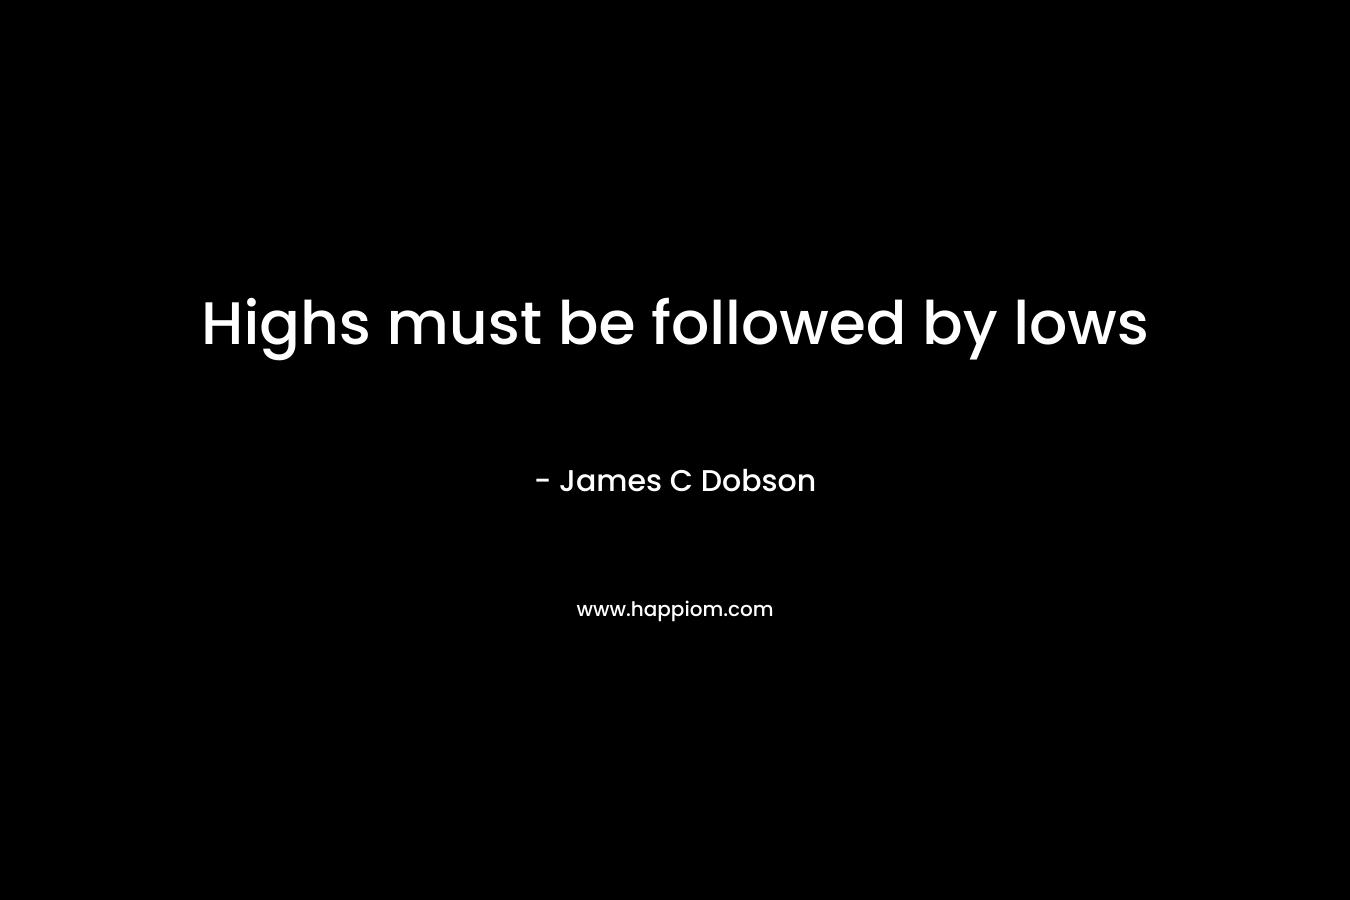 Highs must be followed by lows – James C Dobson